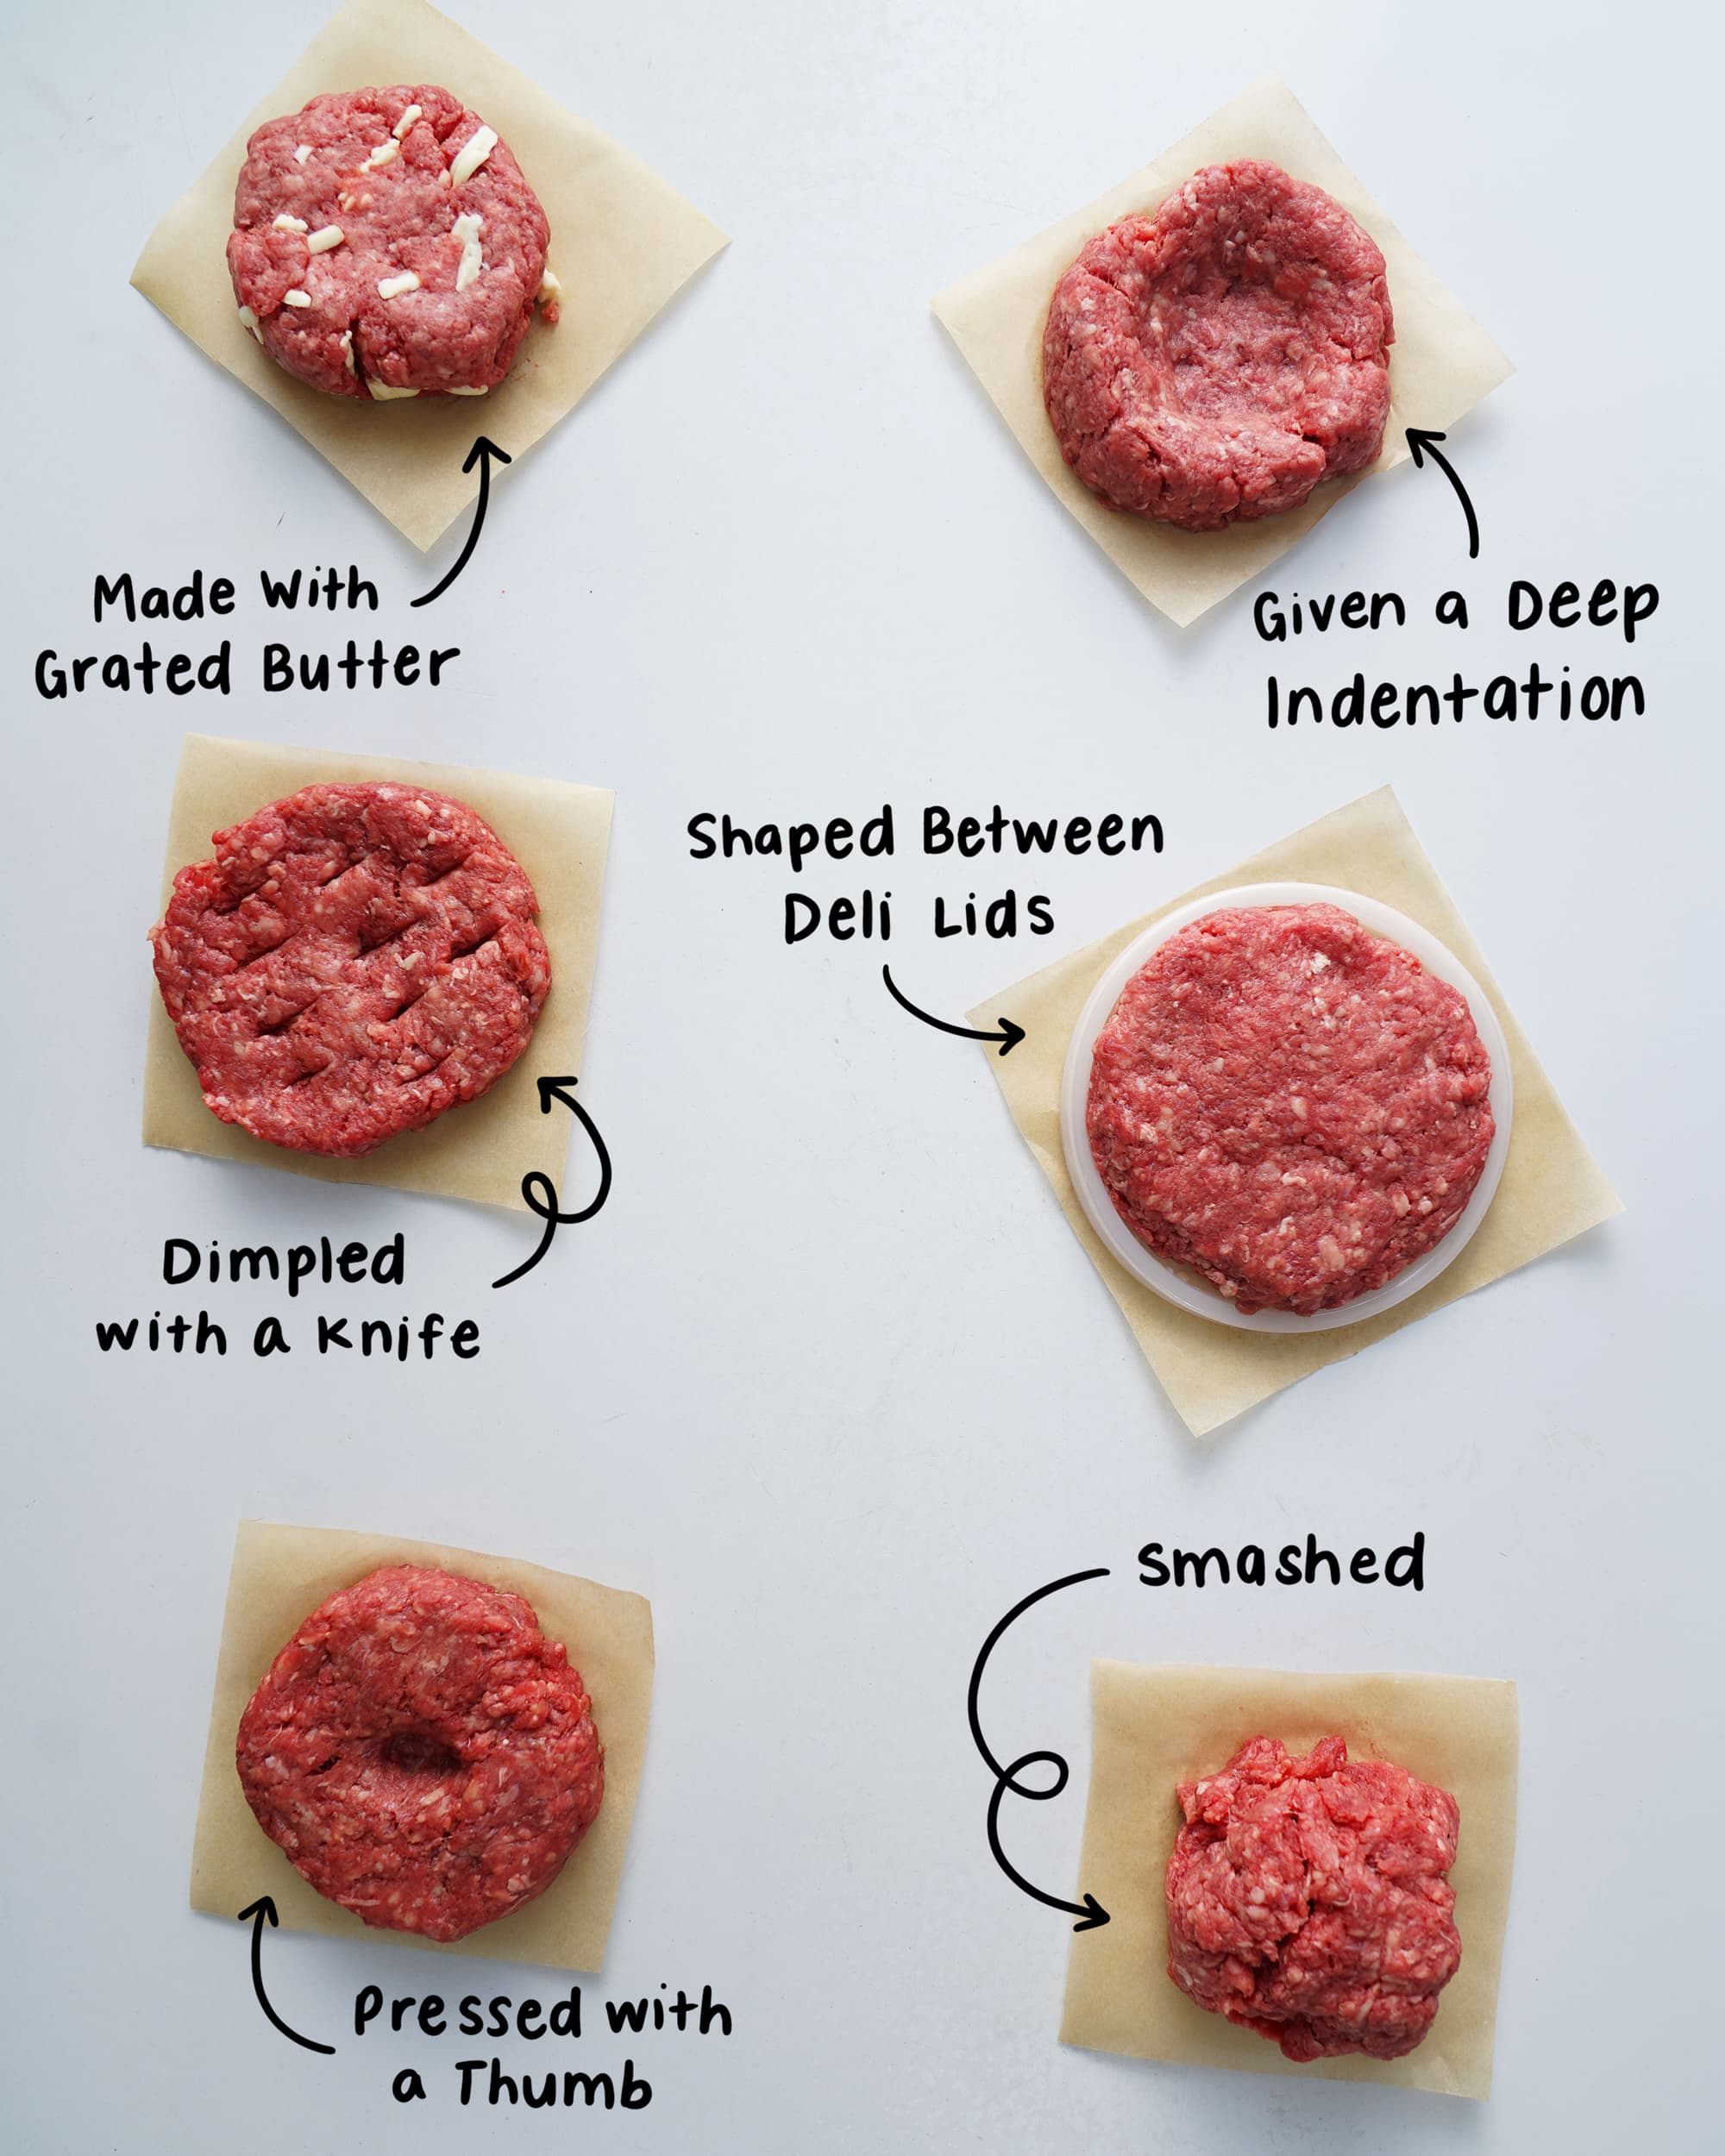 Wacky Tools: The Let's Make Finely Ground Beef Tool